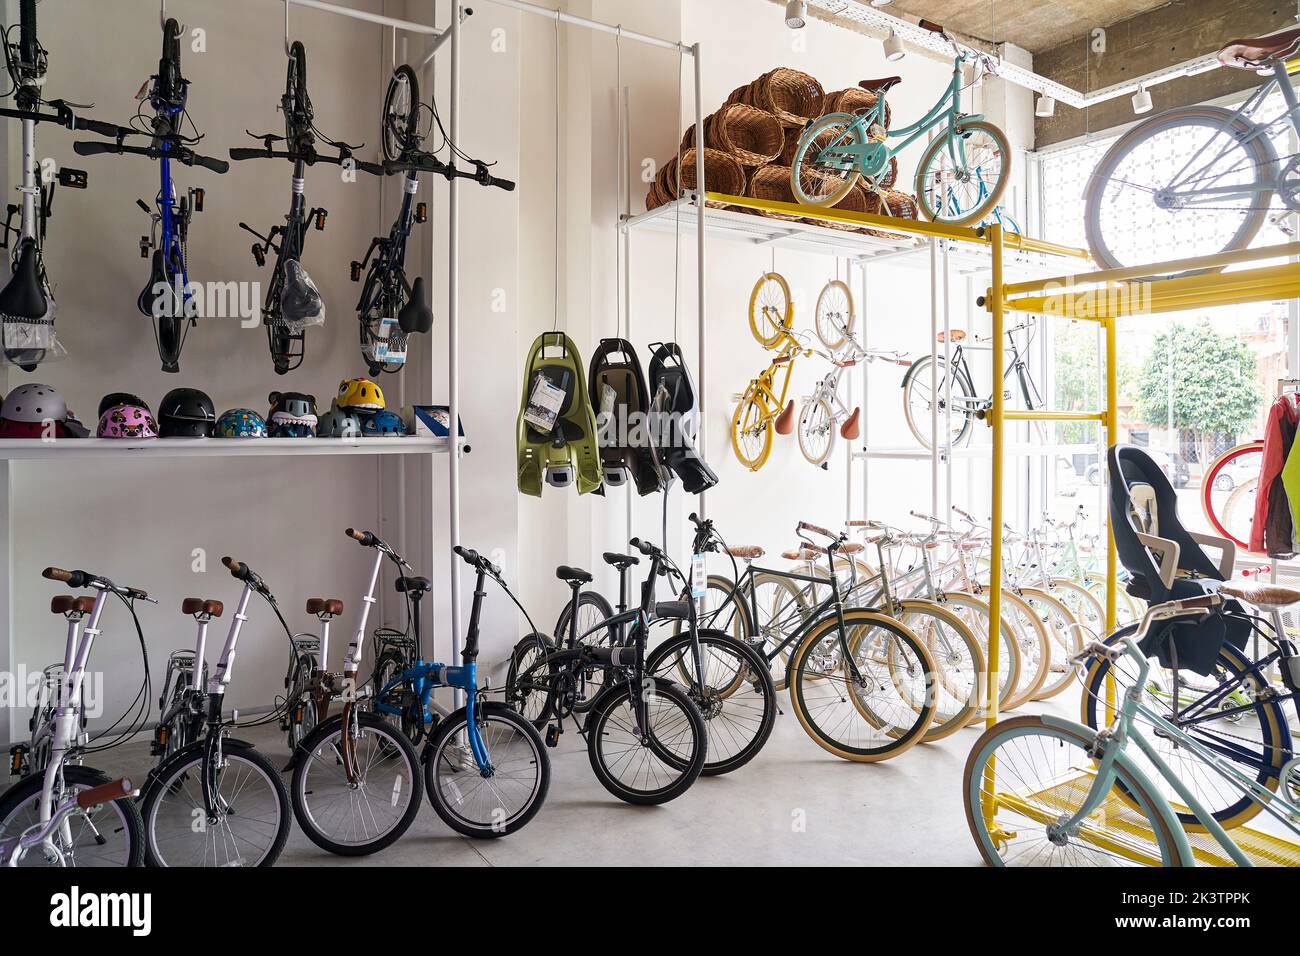 Wide view of small mom & pop bicycle shop Stock Photo